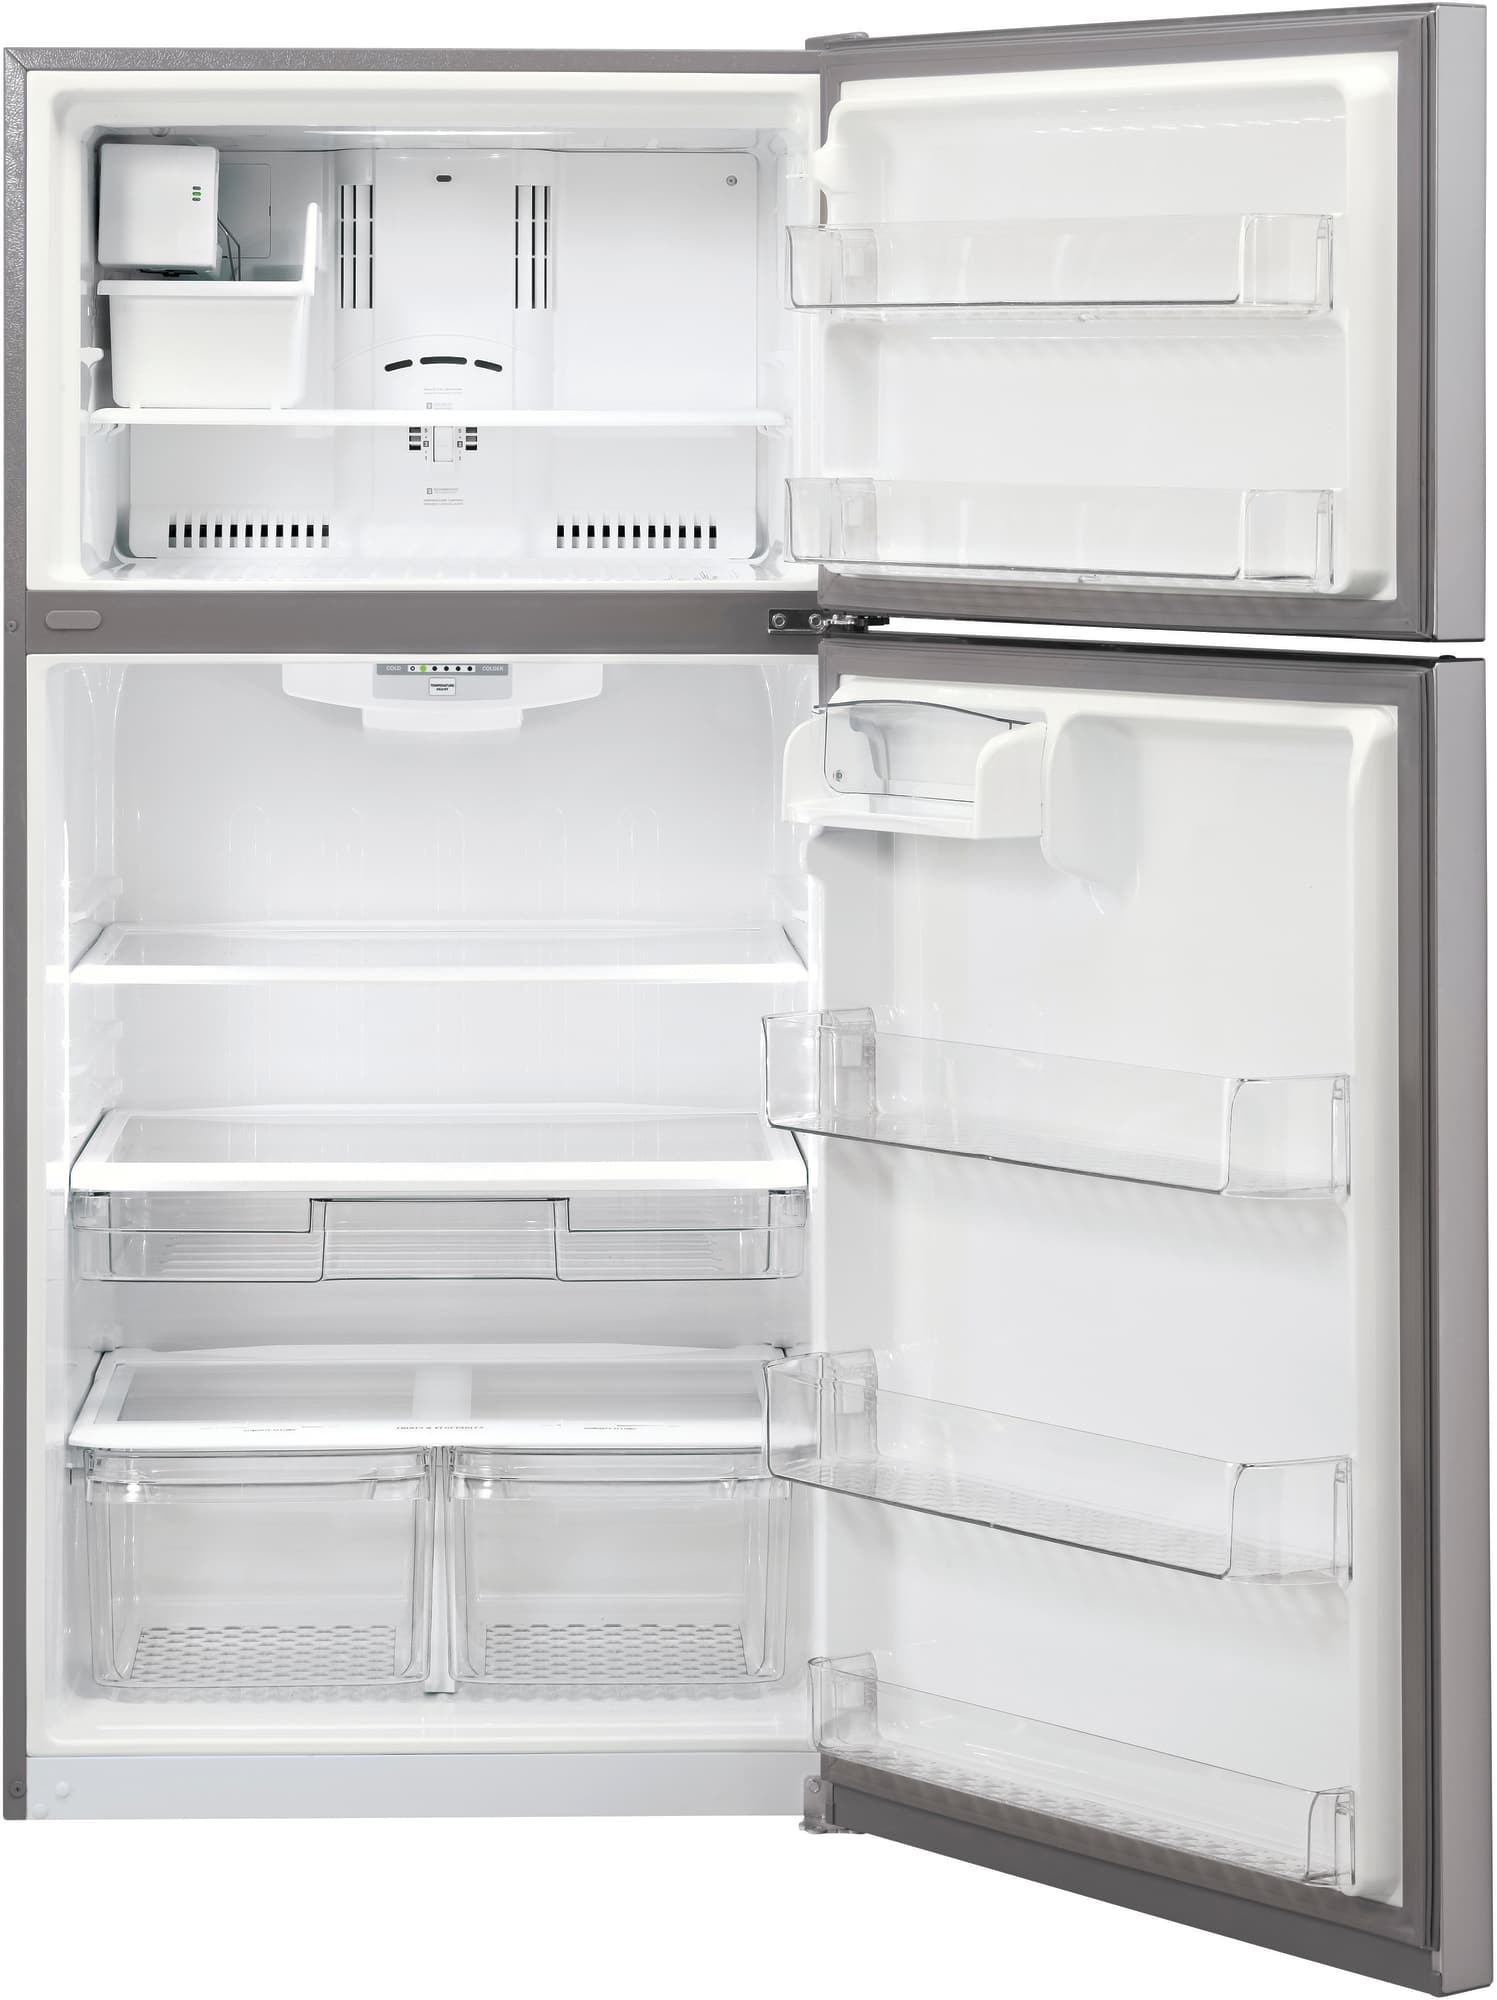 LG LTCS24223S 33 Inch Top Freezer Refrigerator with 23.8 Cu. Ft. Total